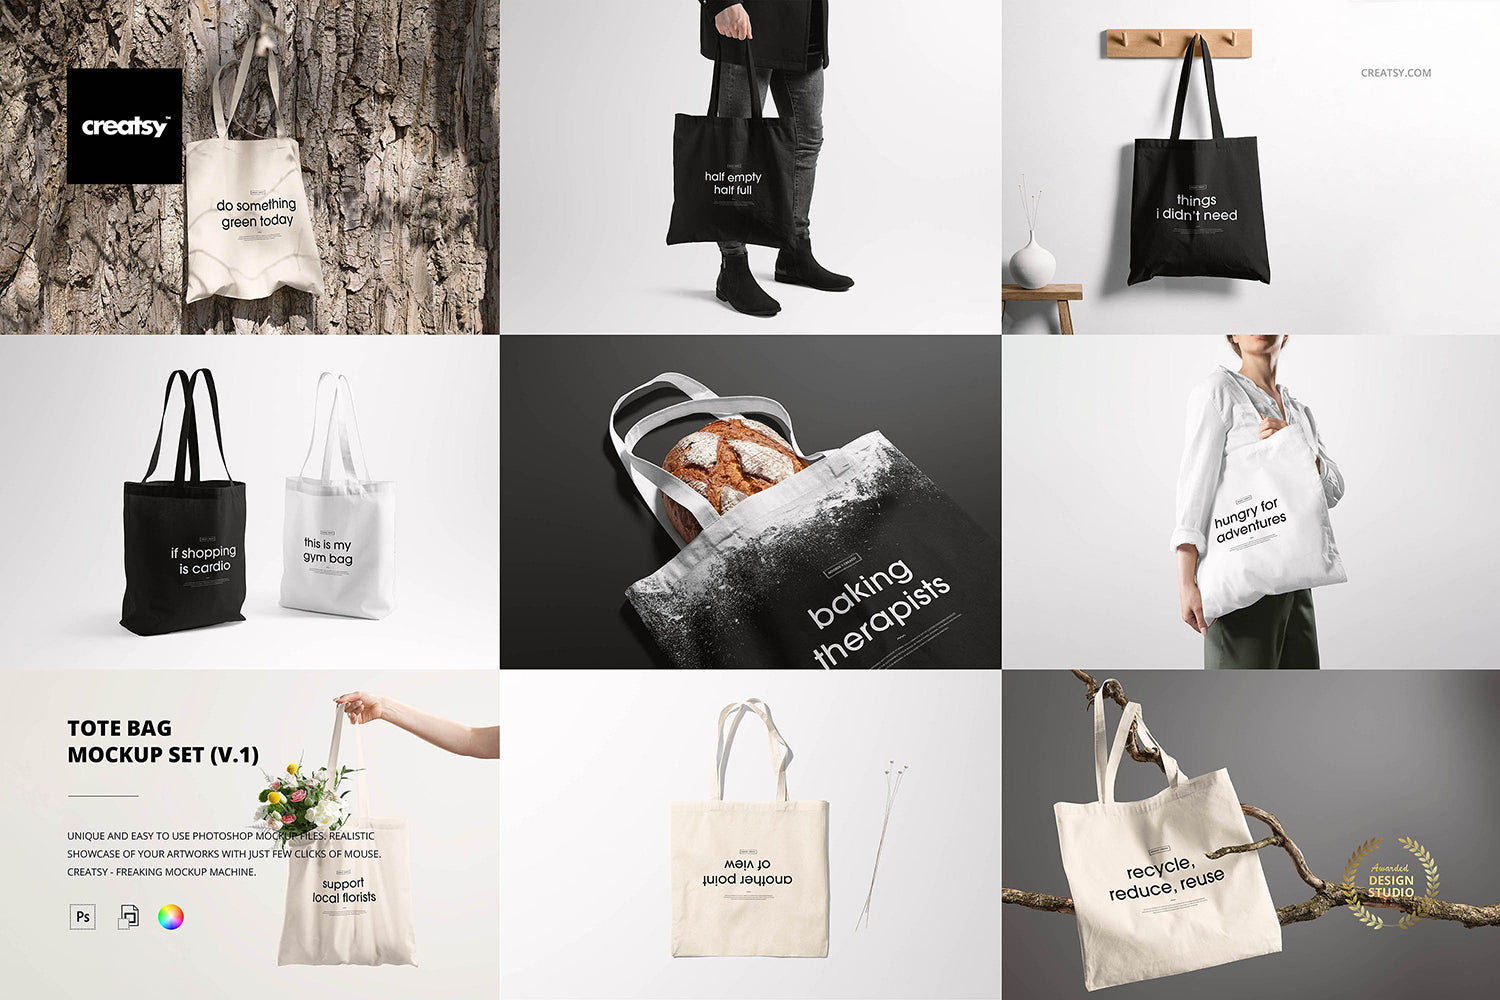 Cute Tote Bag Mockup for Print on Demand Floral Aesthetic 